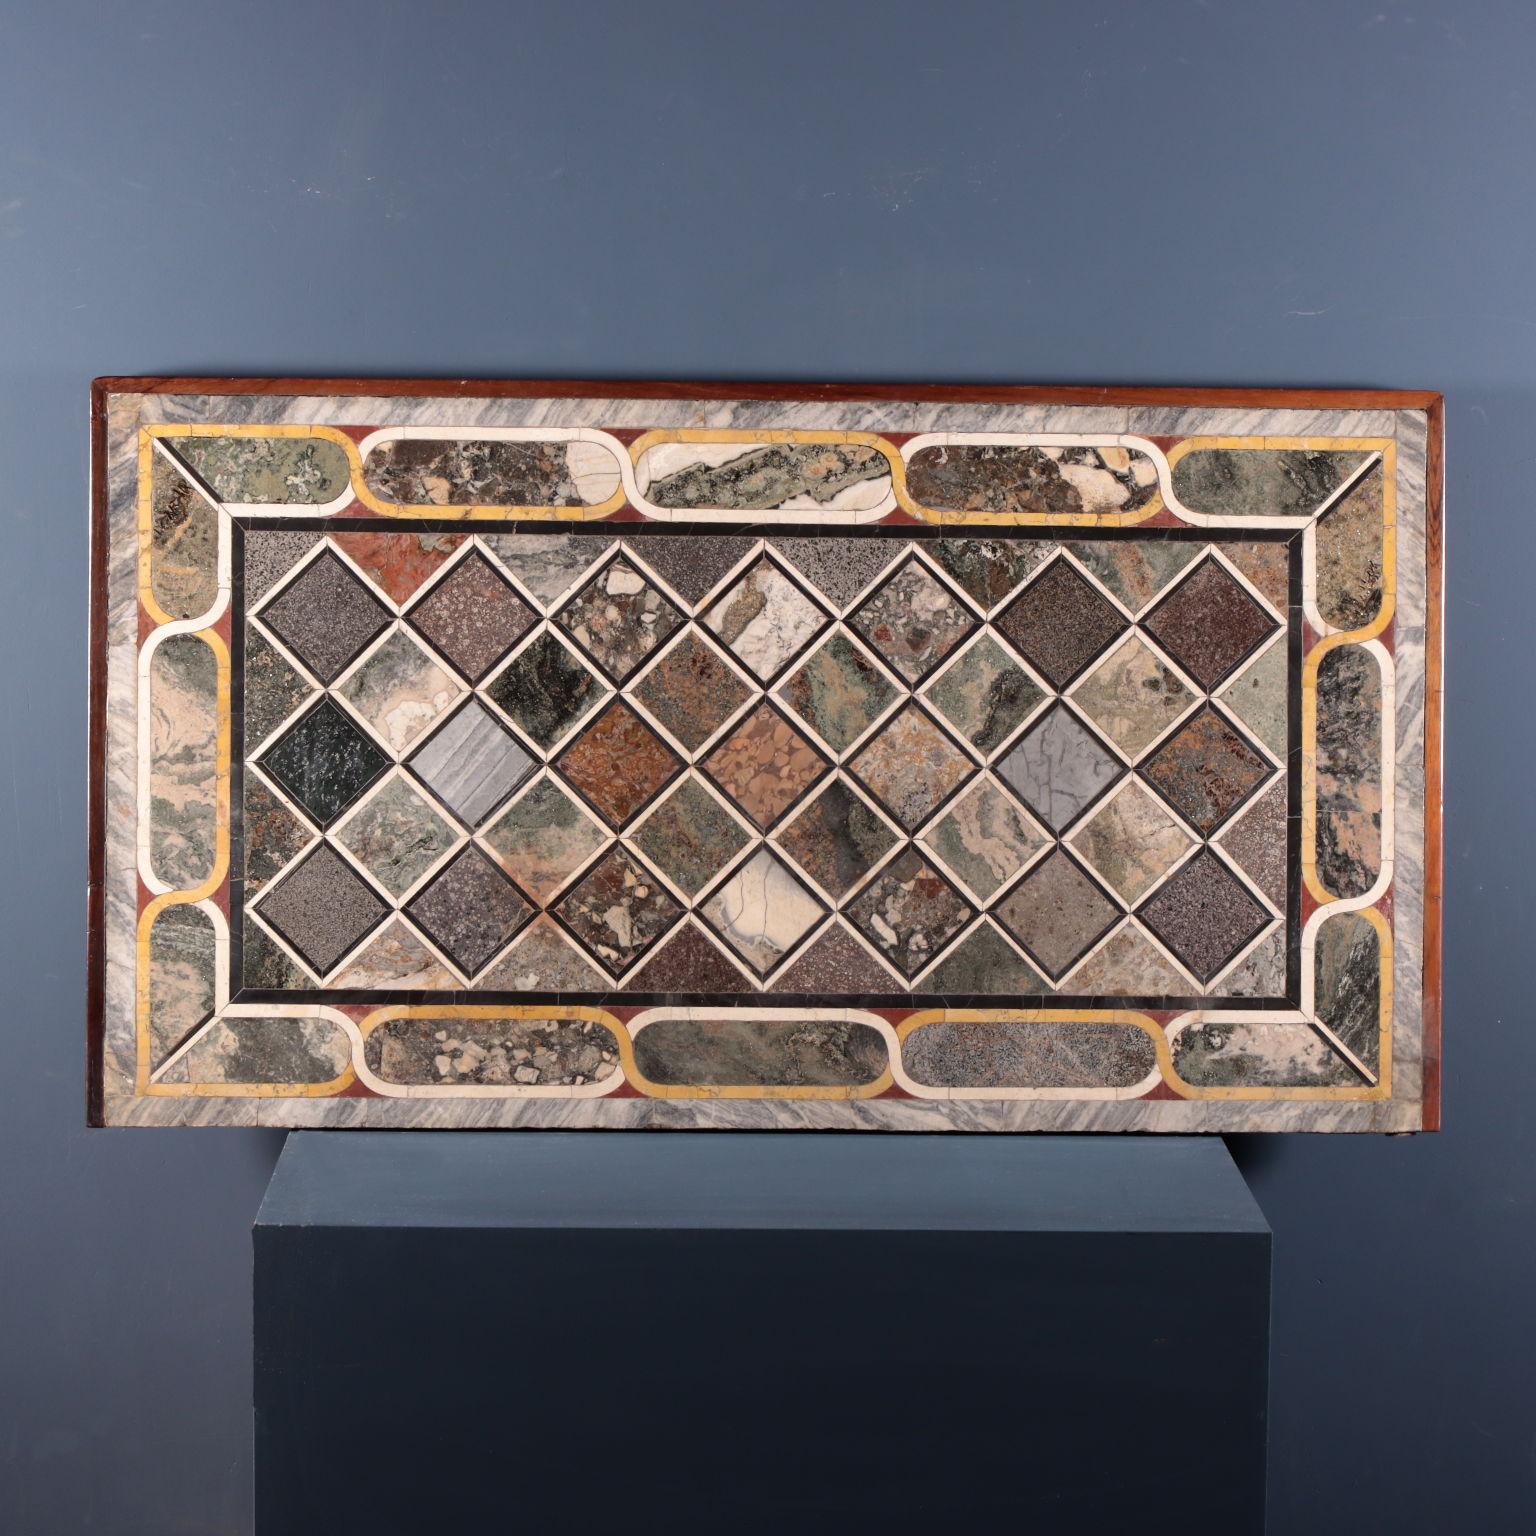 Pair of tables with tops in lava stone and marble, second half of the 18th century, attributed to Tommaso (Rome 1725-Naples 1780) and Mattia (Rome 1746-Naples?) Valenziani. A selected sample of lava stones is arranged on the top; in the border